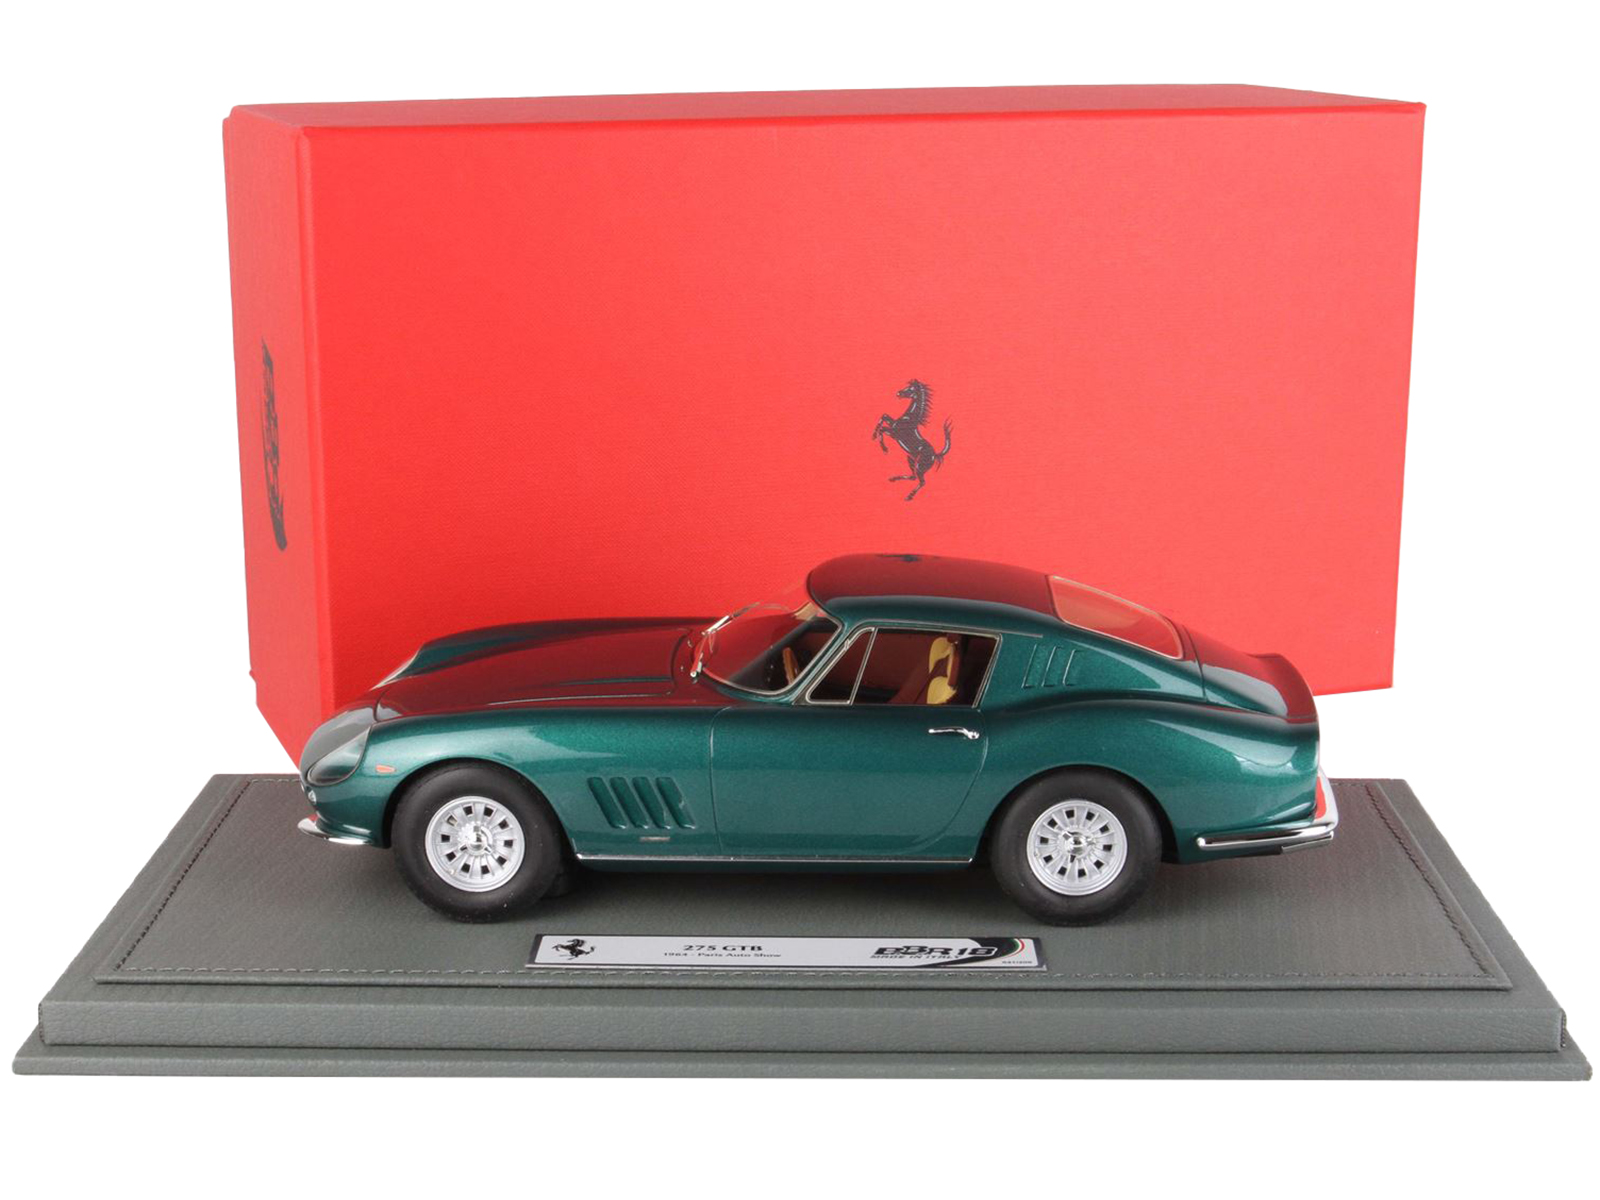 Image of Ferrari 275 GTB Dark Green Metallic "Paris Auto Show" (1964) with DISPLAY CASE Limited Edition to 200 pieces Worldwide 1/18 Model Car by BBR